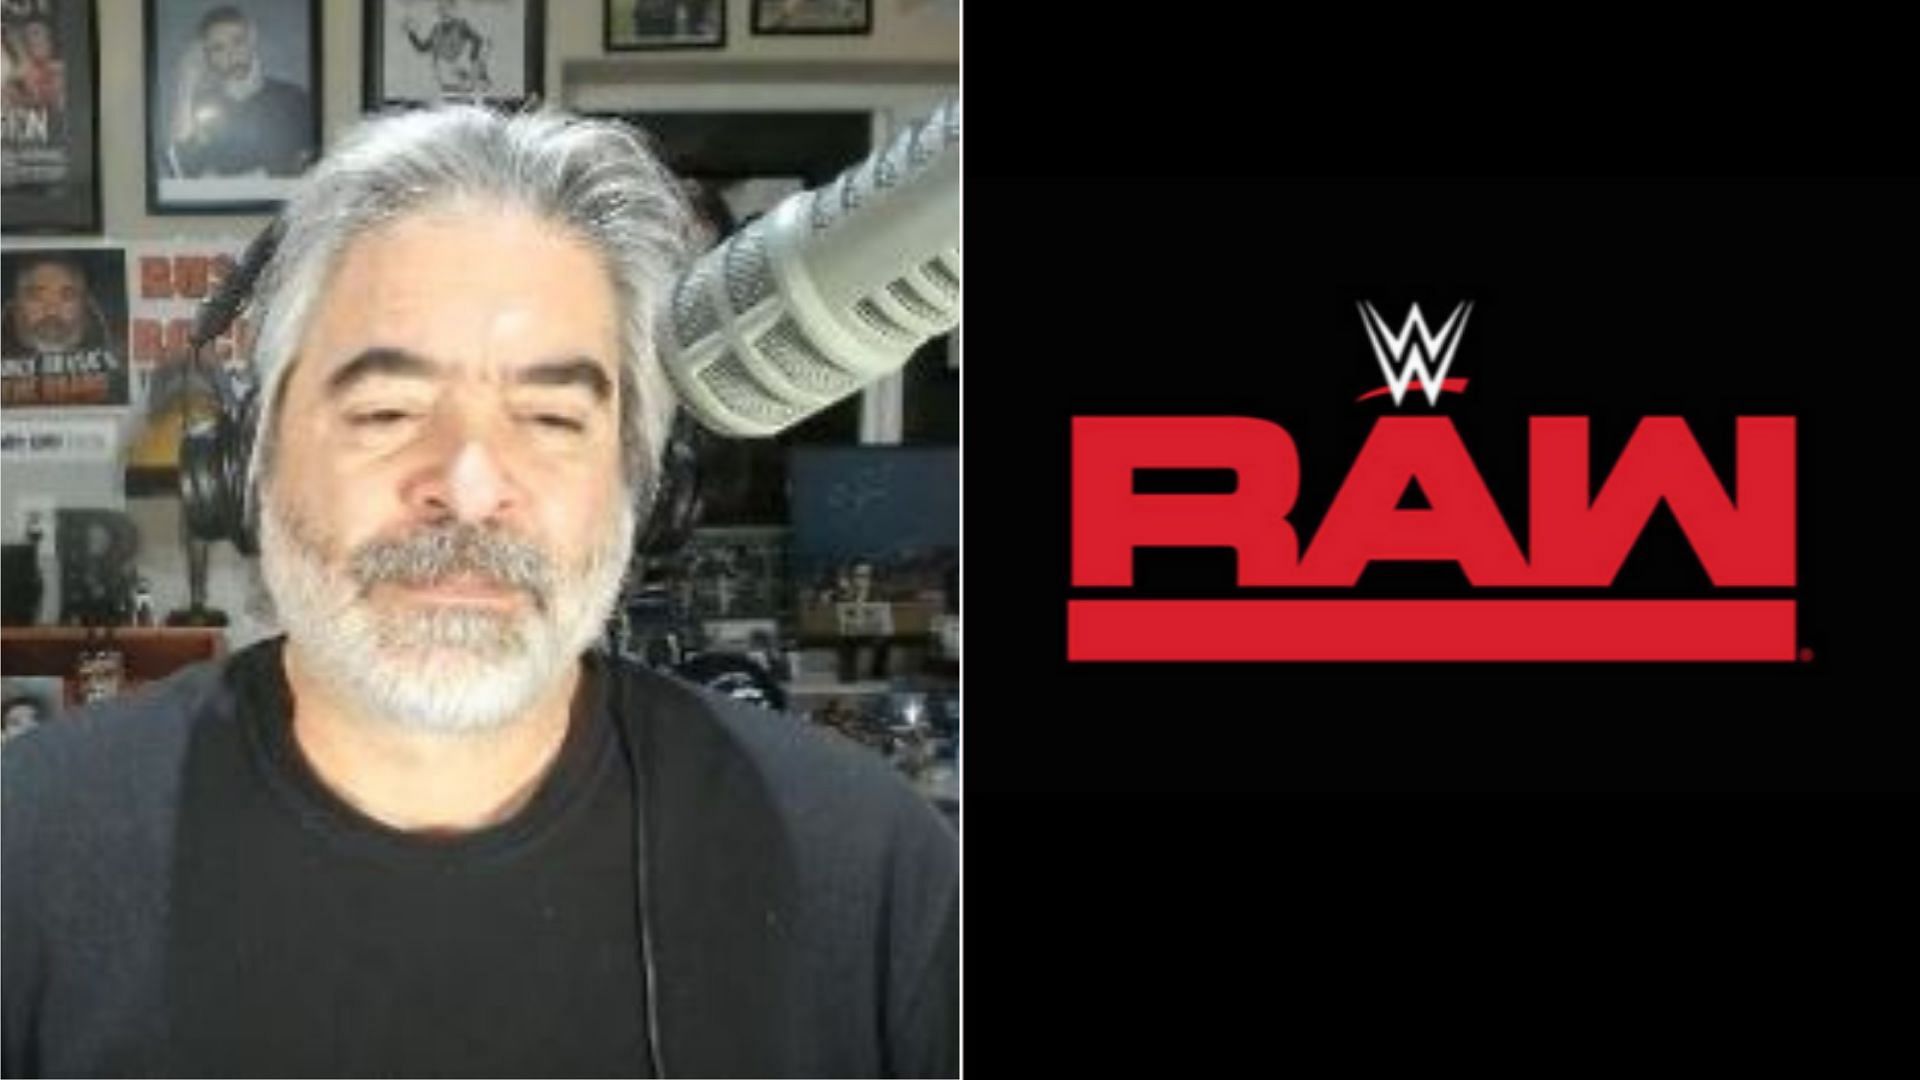 The former WWE and WCW writer gave his brutally honest opinion.